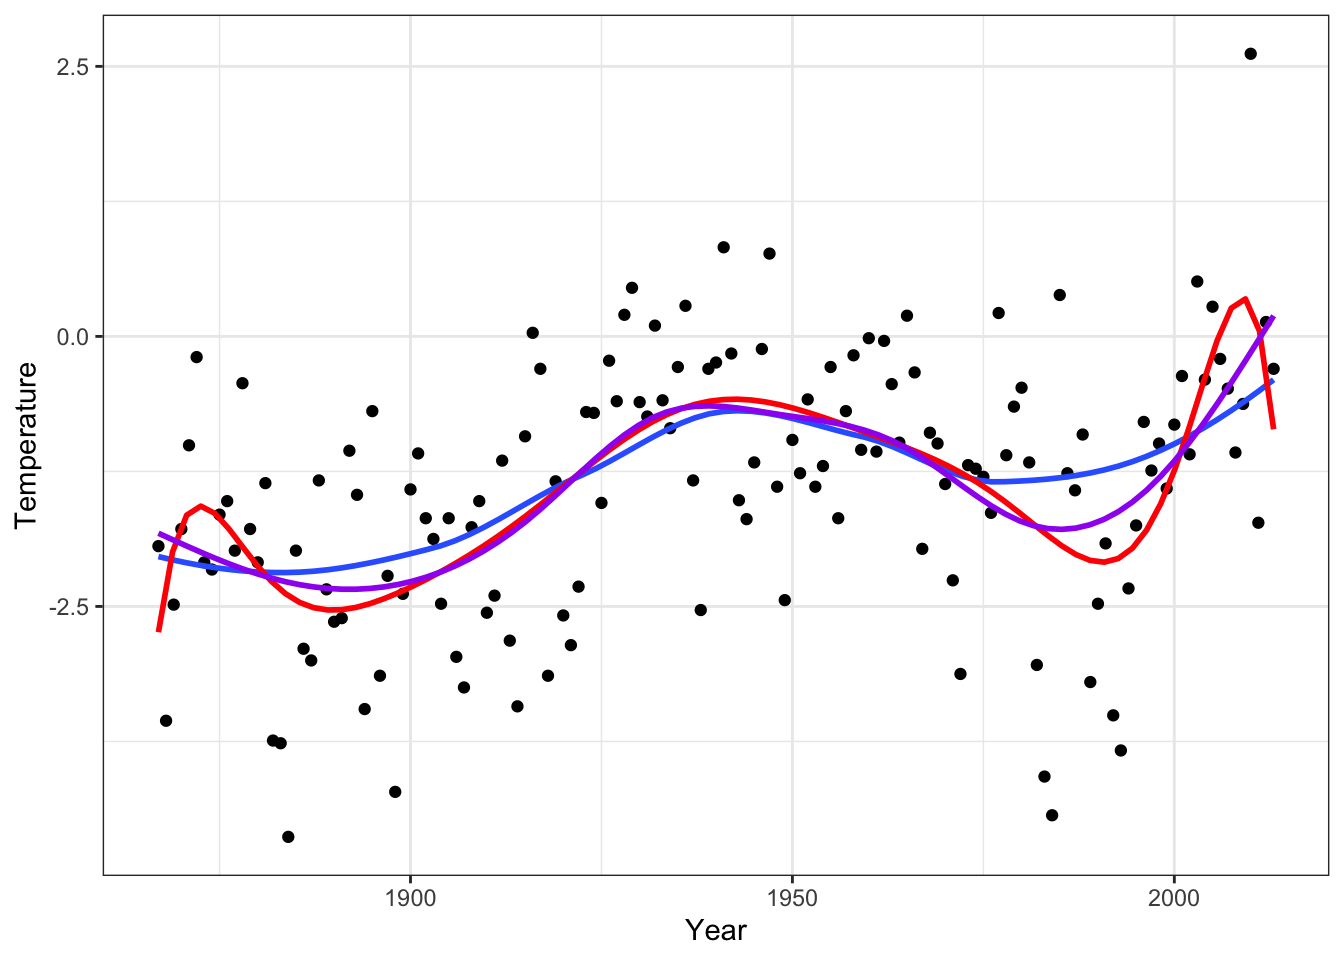 Nuuk average yearly temperature in degrees Celsius (left) smoothed using loess (black), a degree 10 polynomial (red) and a smooth spline (purple). Nuuk average monthly temperature against Qaqortoq average montly temperature (right) smoothed using a straight line (red) and a smooth spline (purple).